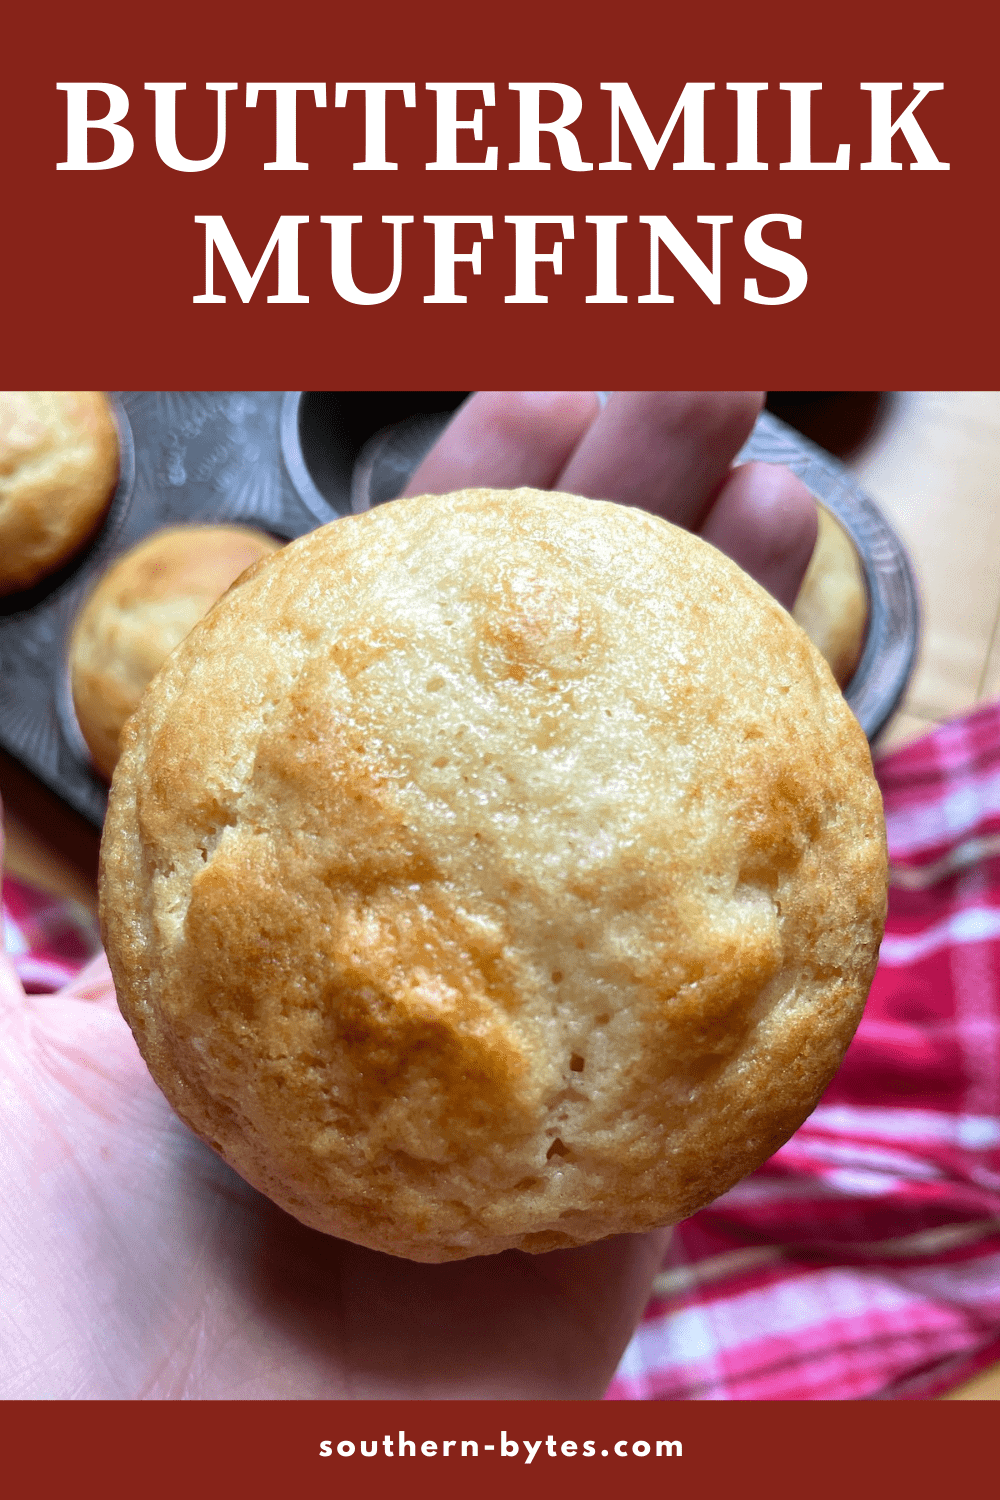 A hand holding a buttermilk muffin with overlay text.